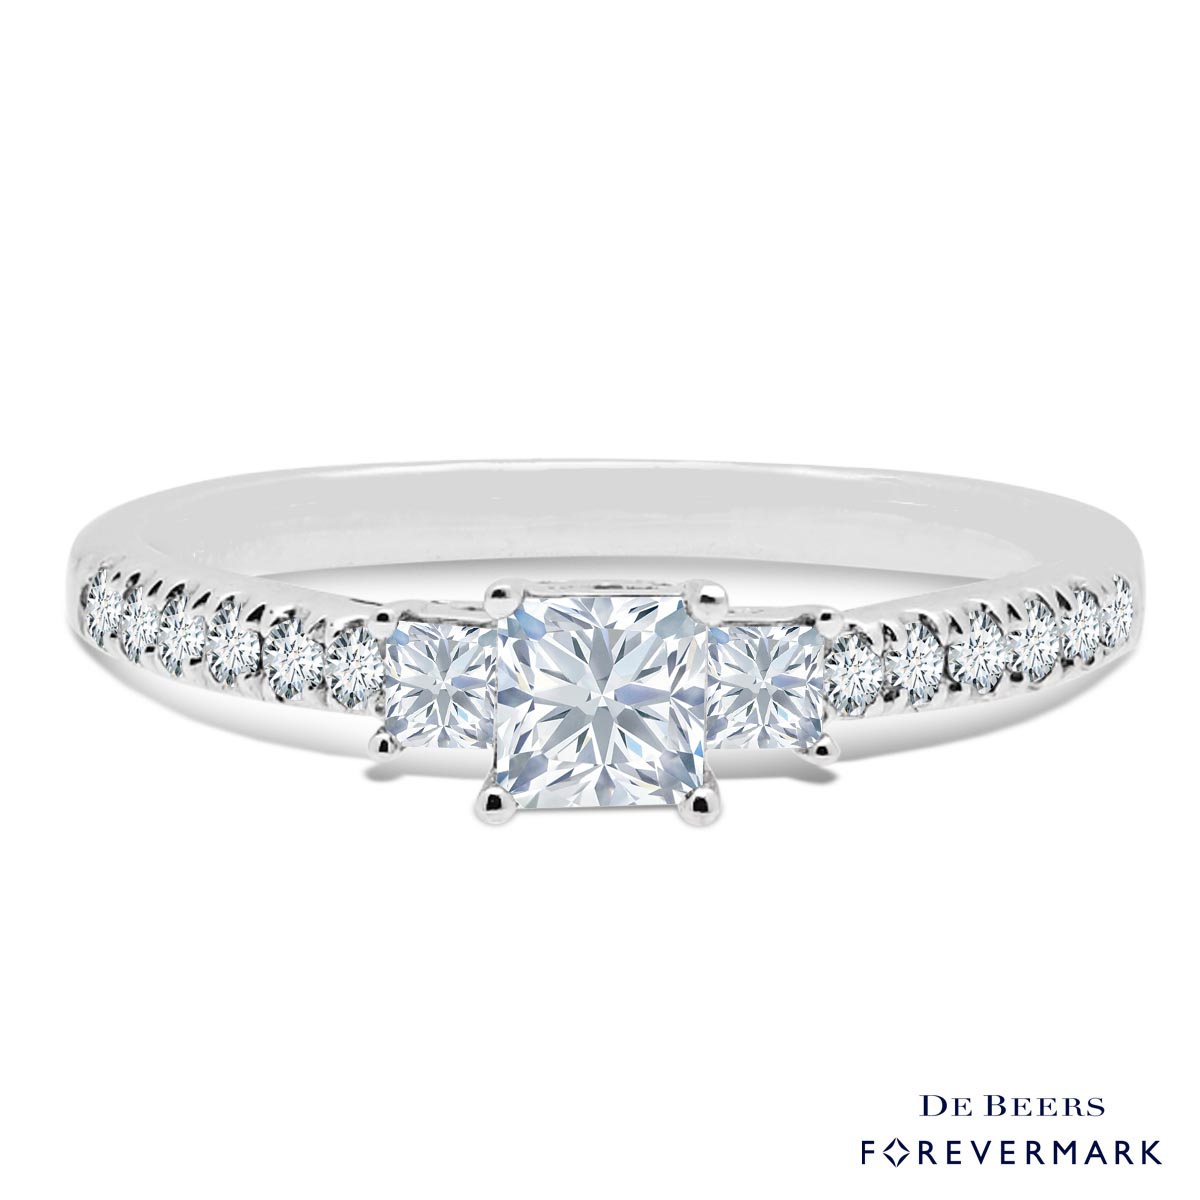 De Beers Forevermark Three Stone Diamond Engagement Ring in 18kt White Gold (5/8ct tw)